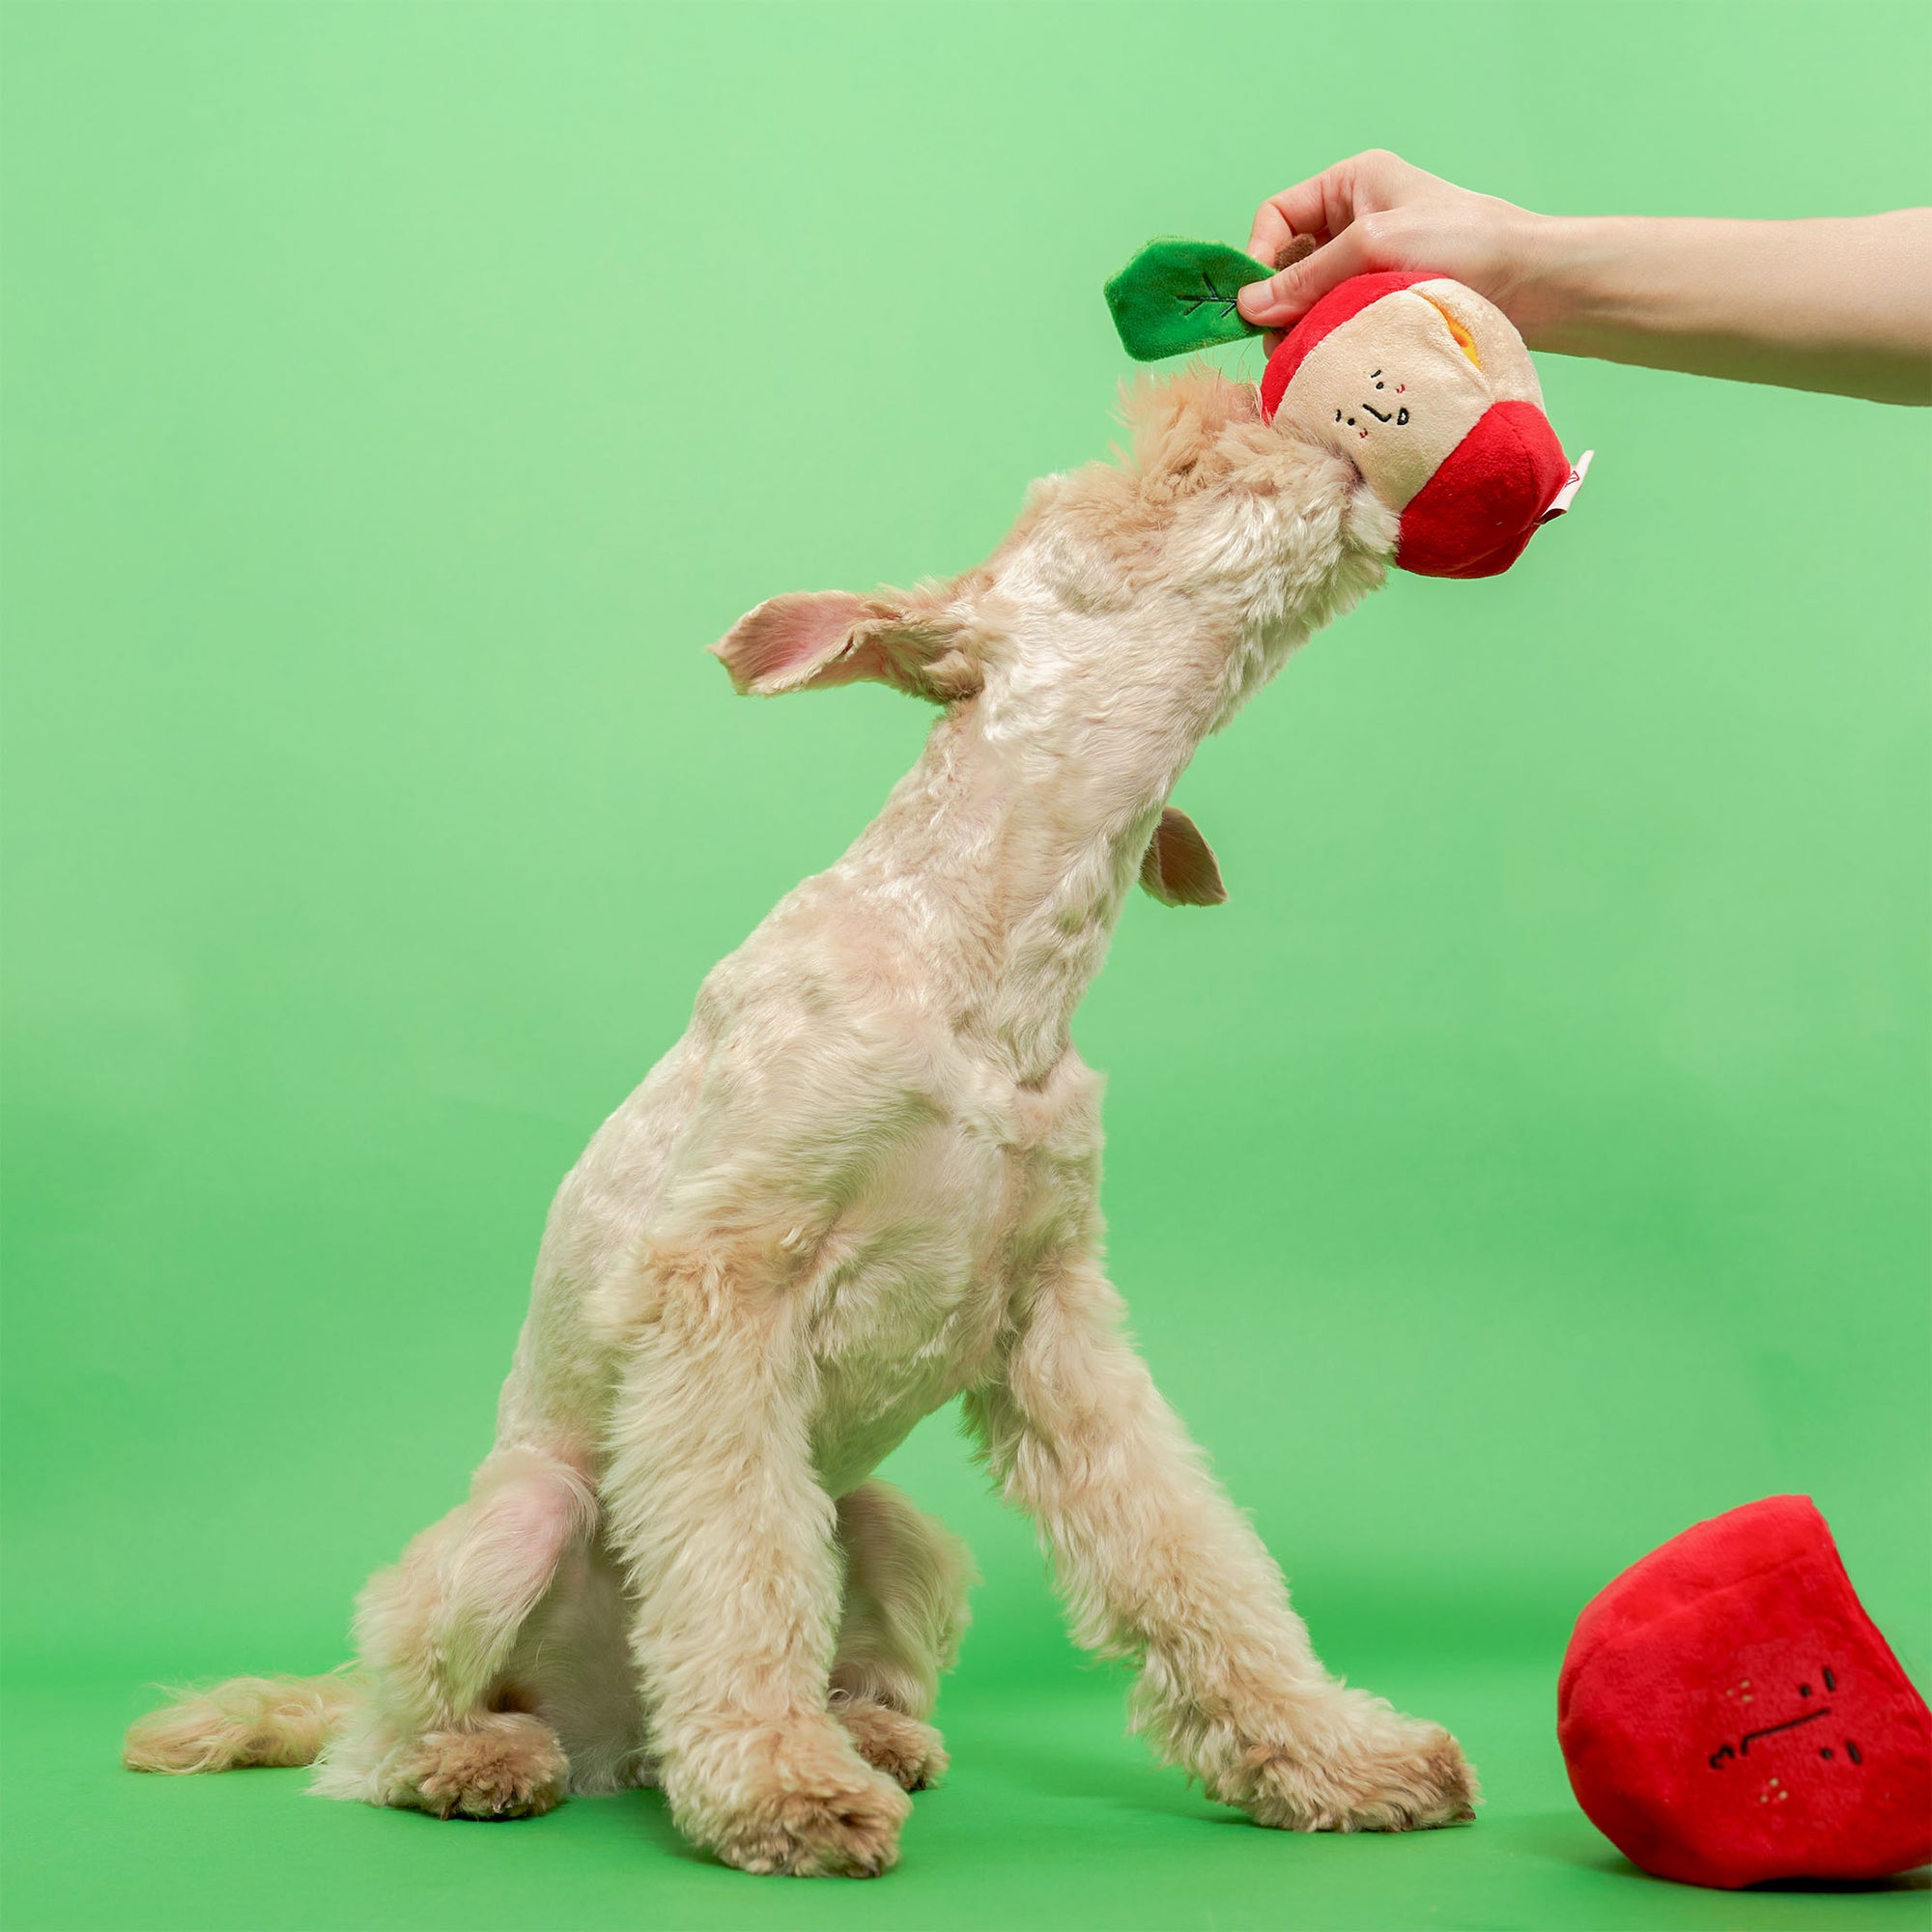 A white dog on its hind legs reaching for a red and white apple-shaped dog toy held by a person's hand against a green background, with another similar toy lying on the ground.